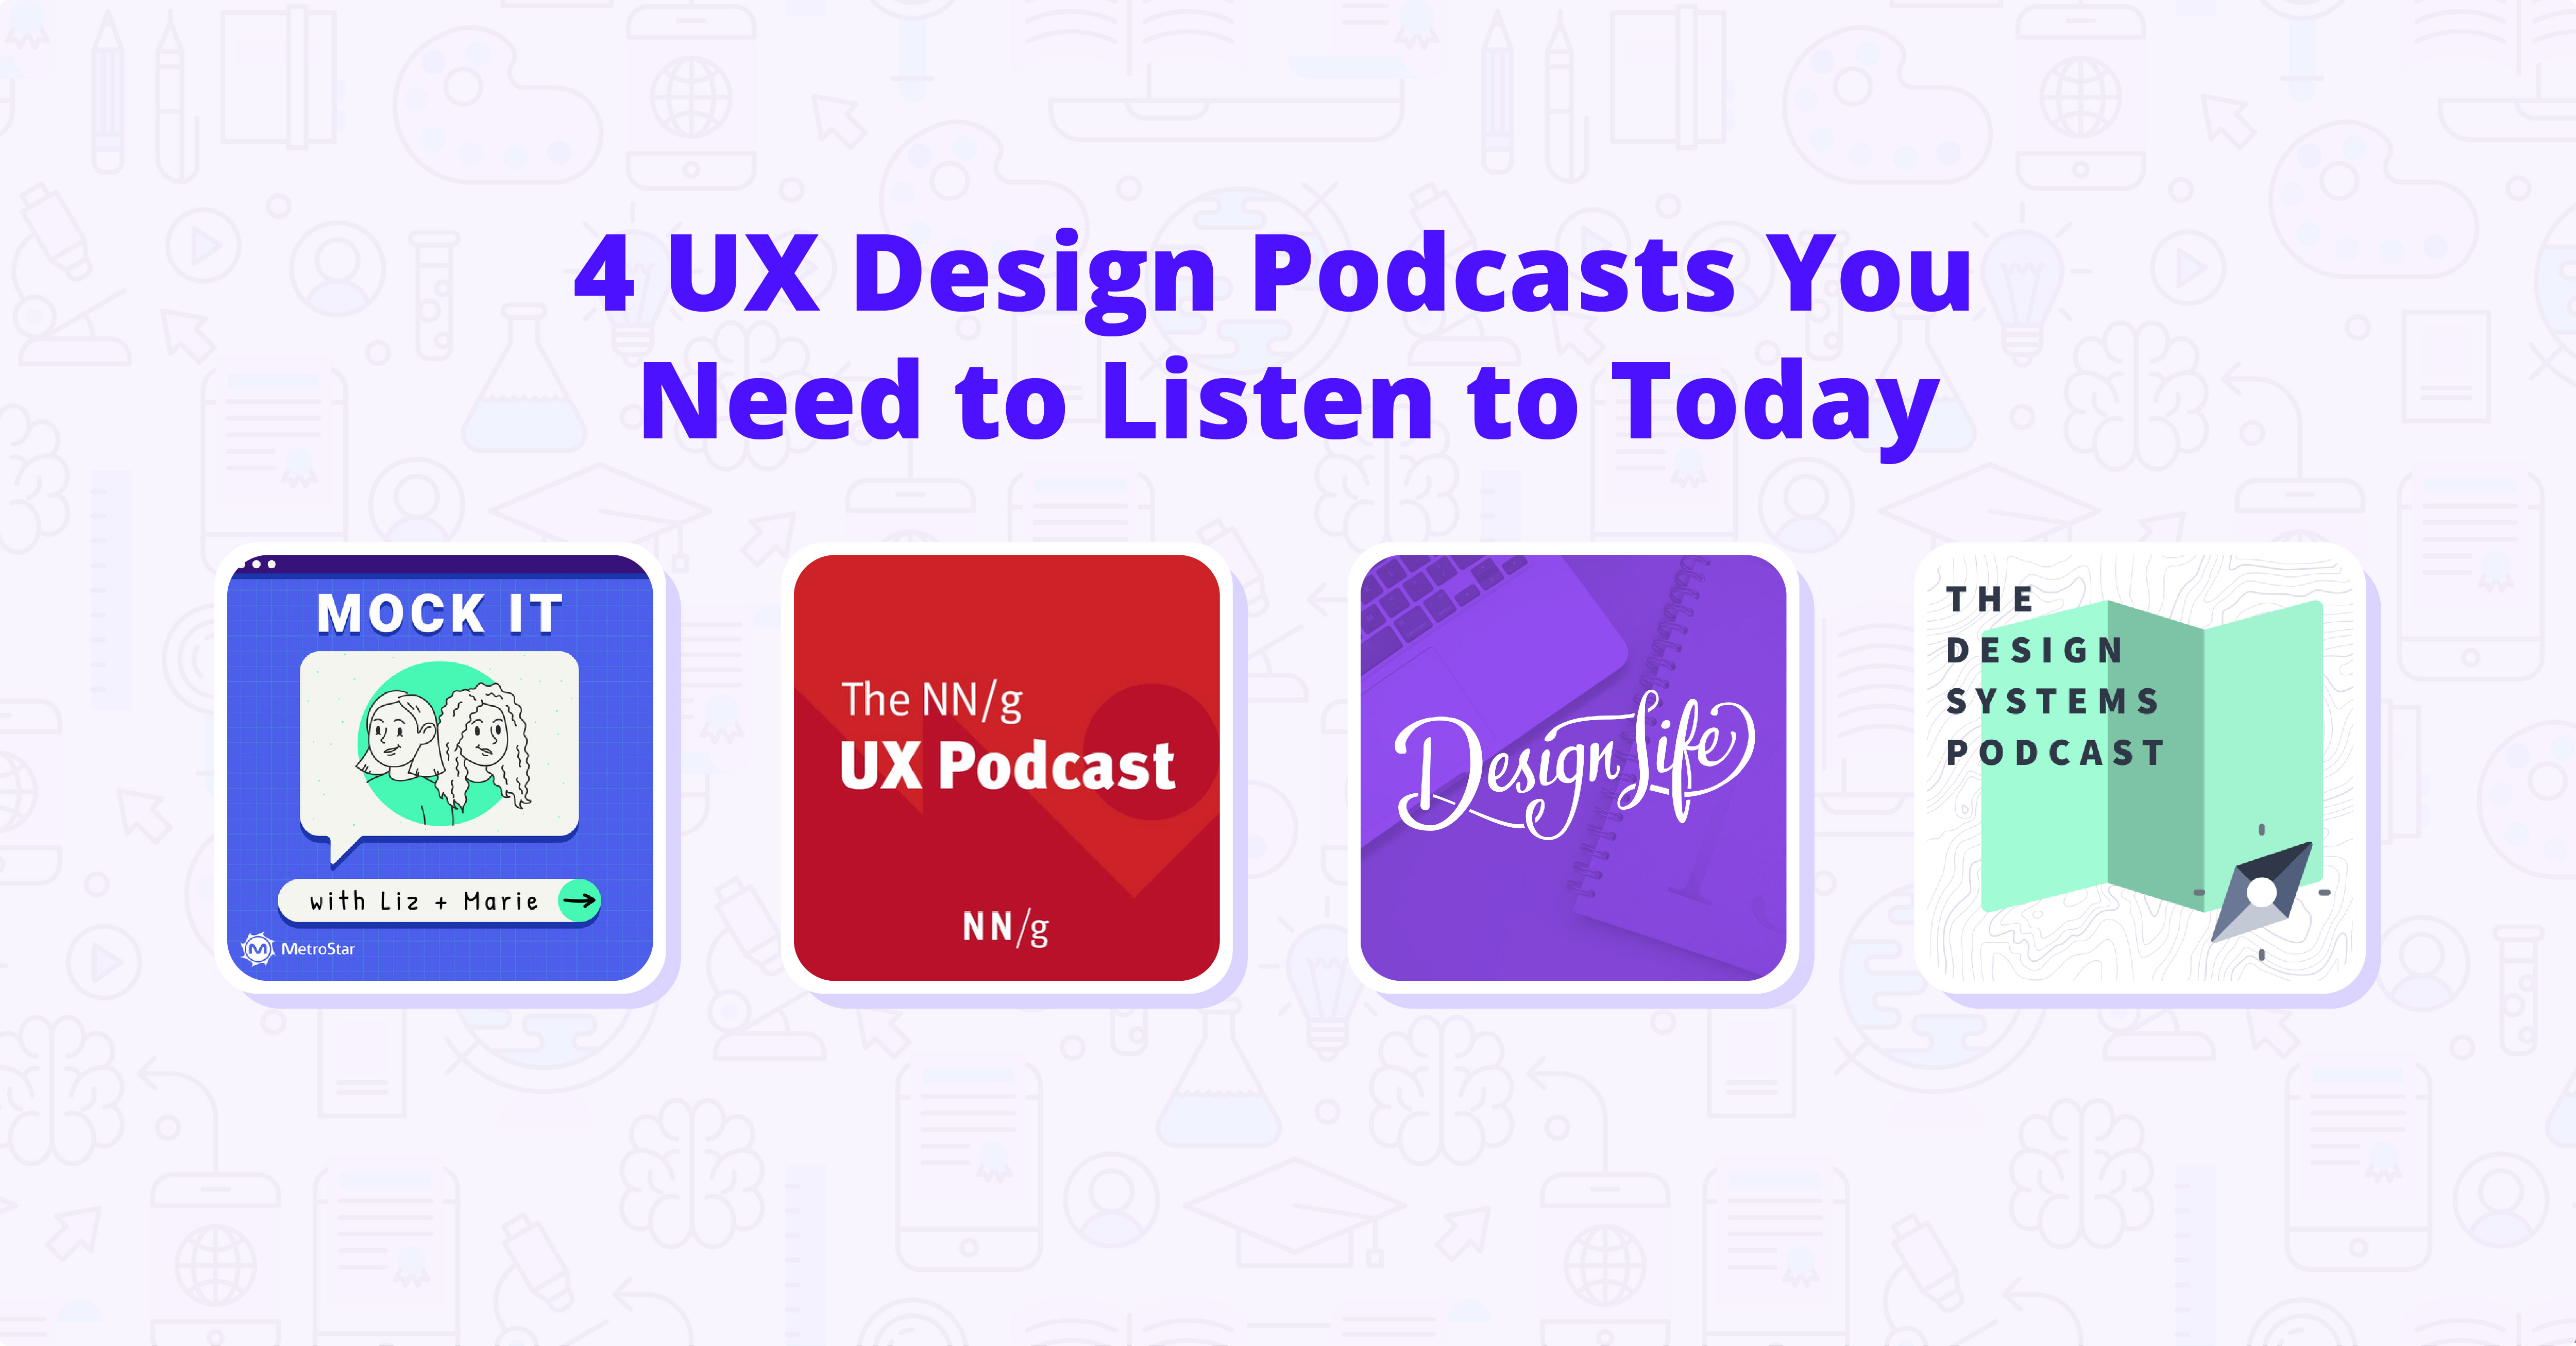 four free UX podcasts that are the best to listen to today and shows four podcast logos on a purple background. 